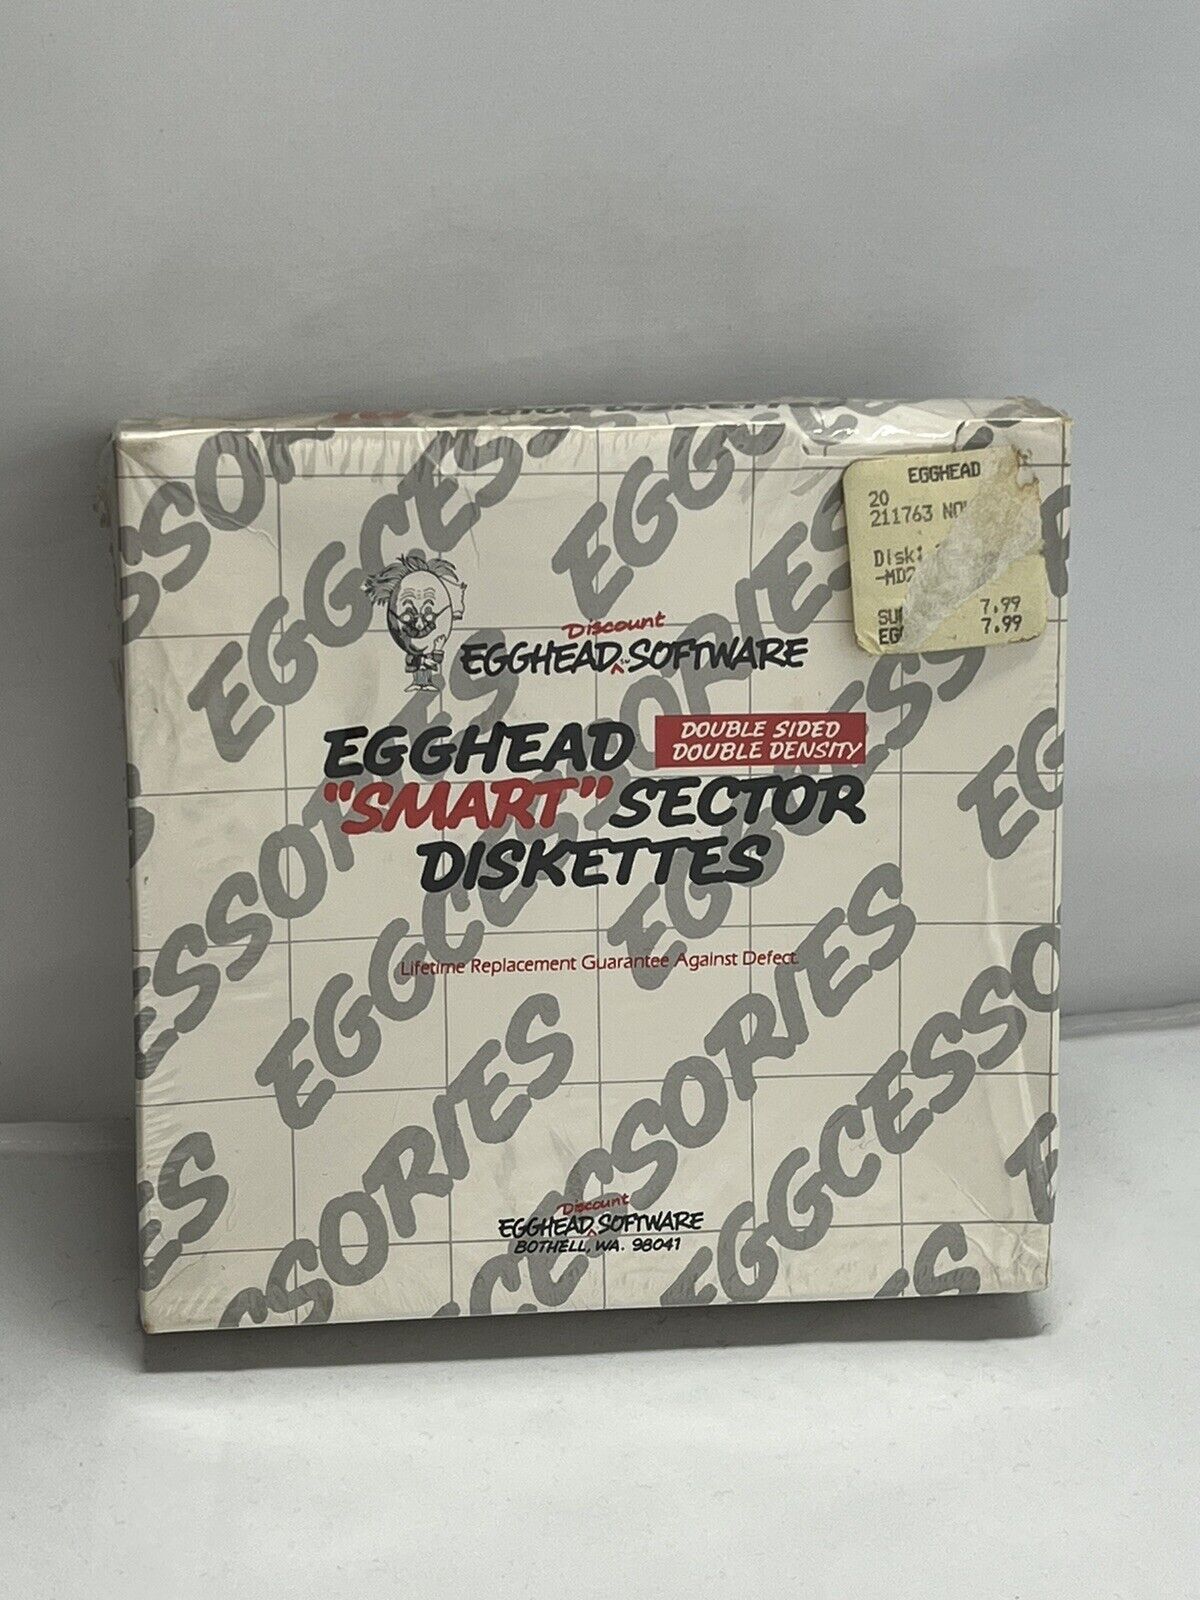 SEALED Egghead DS DD Double Sided/Double Density Smart Sector Diskettes 5 1/4